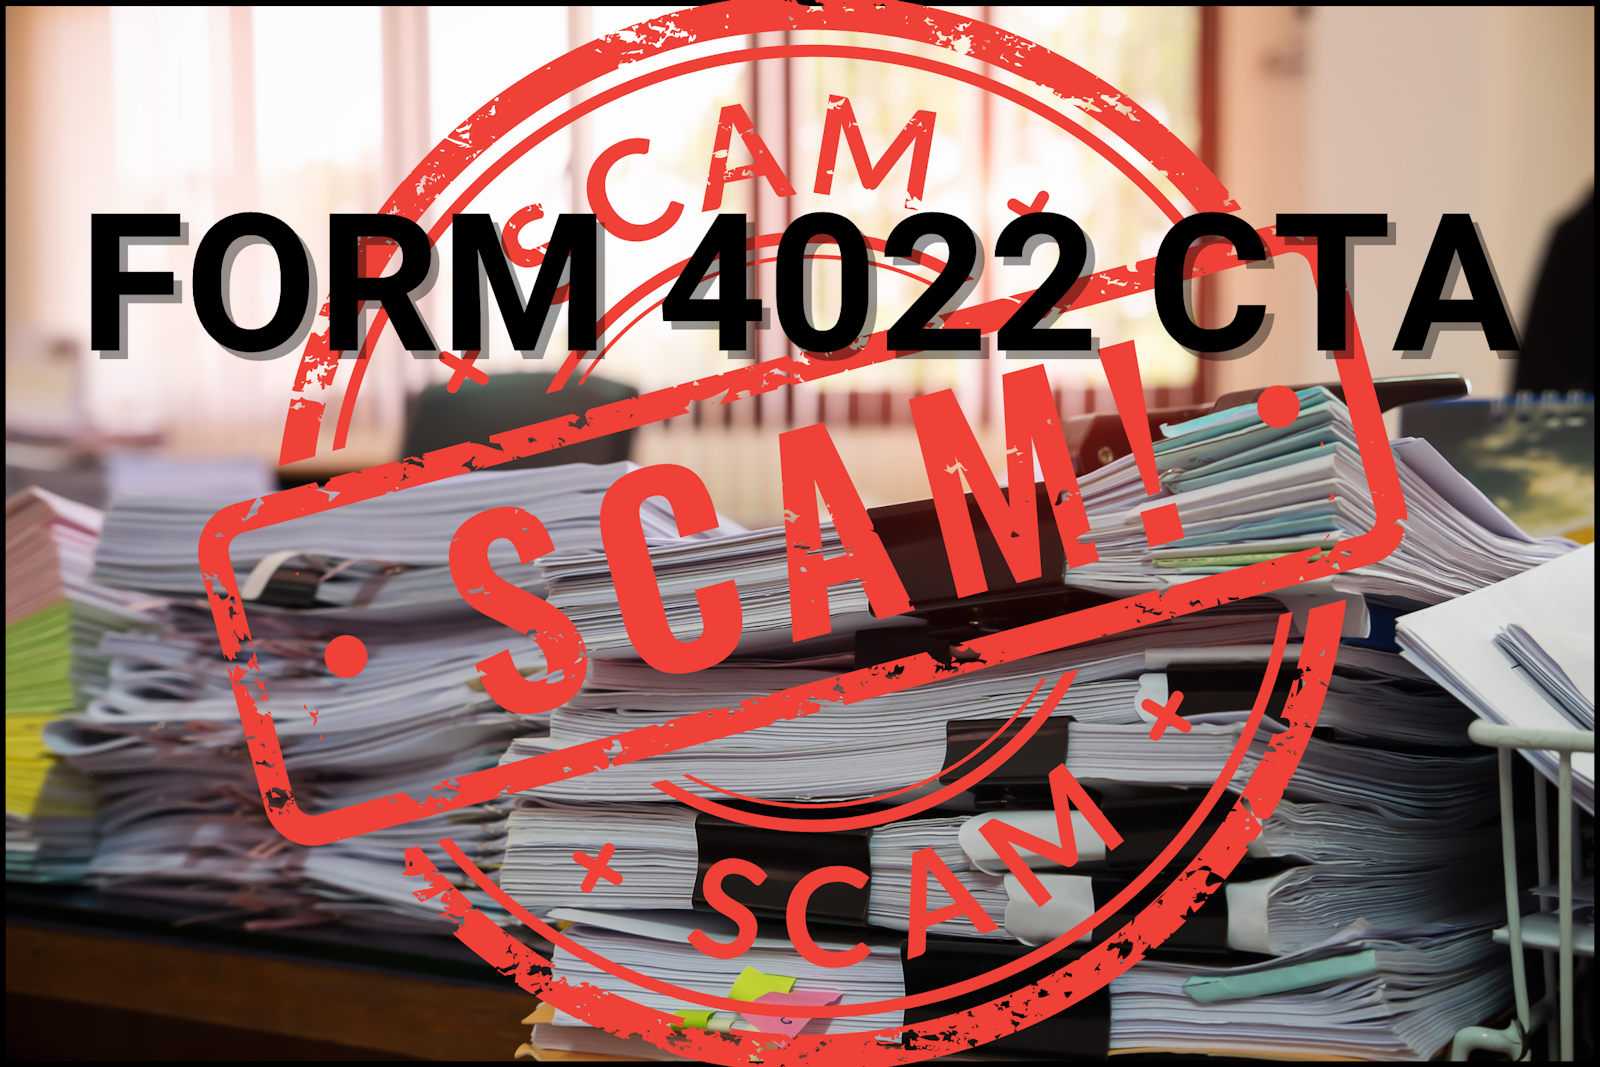 Form 4022 Scam